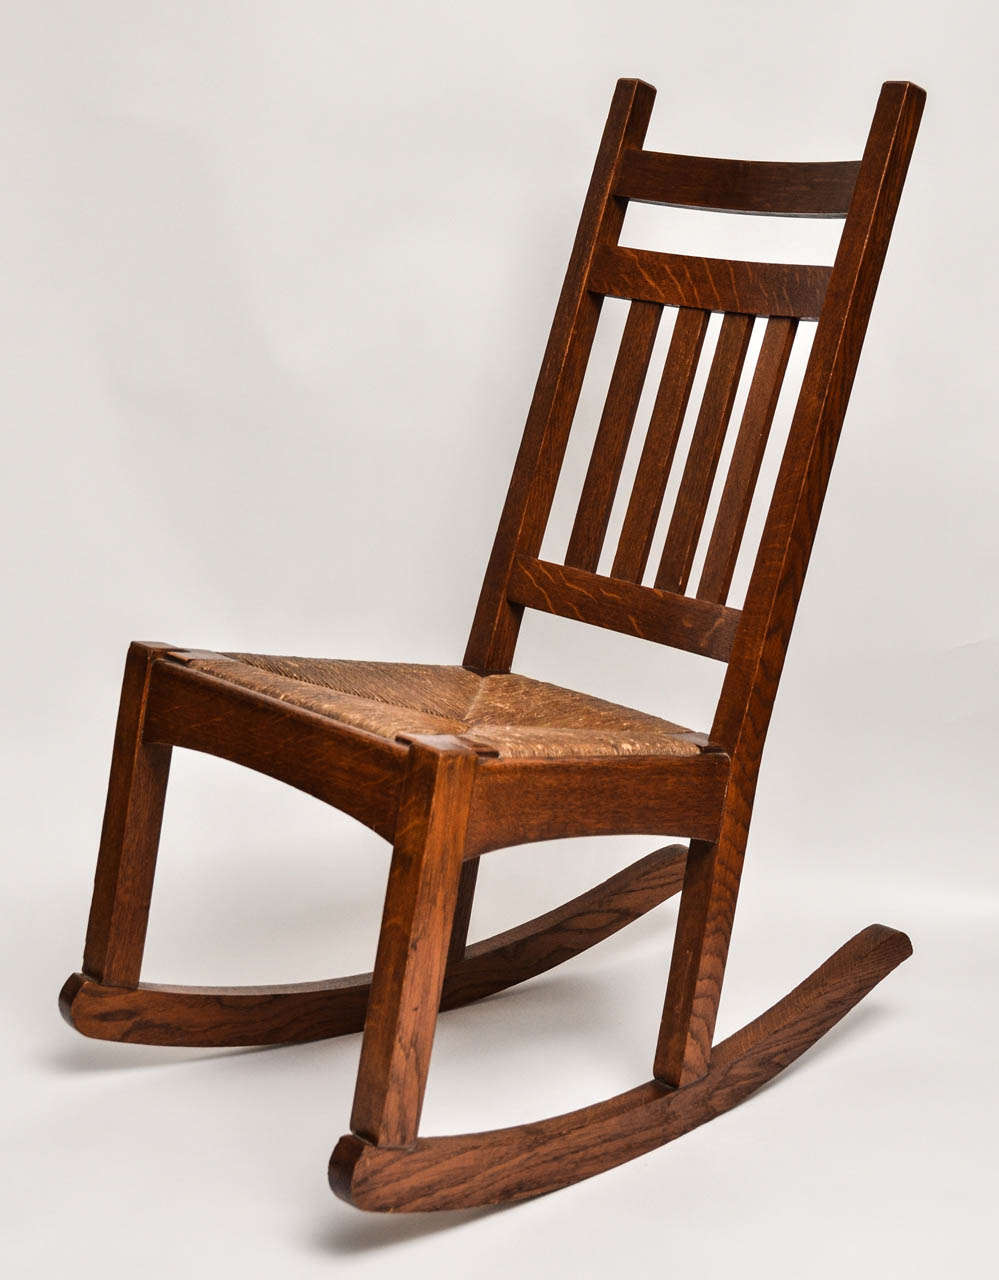 Mission Oak Rocking Chair designed by the Michigan Chair Company.  Small scale with original rush seat. Good patina (original warm oak)